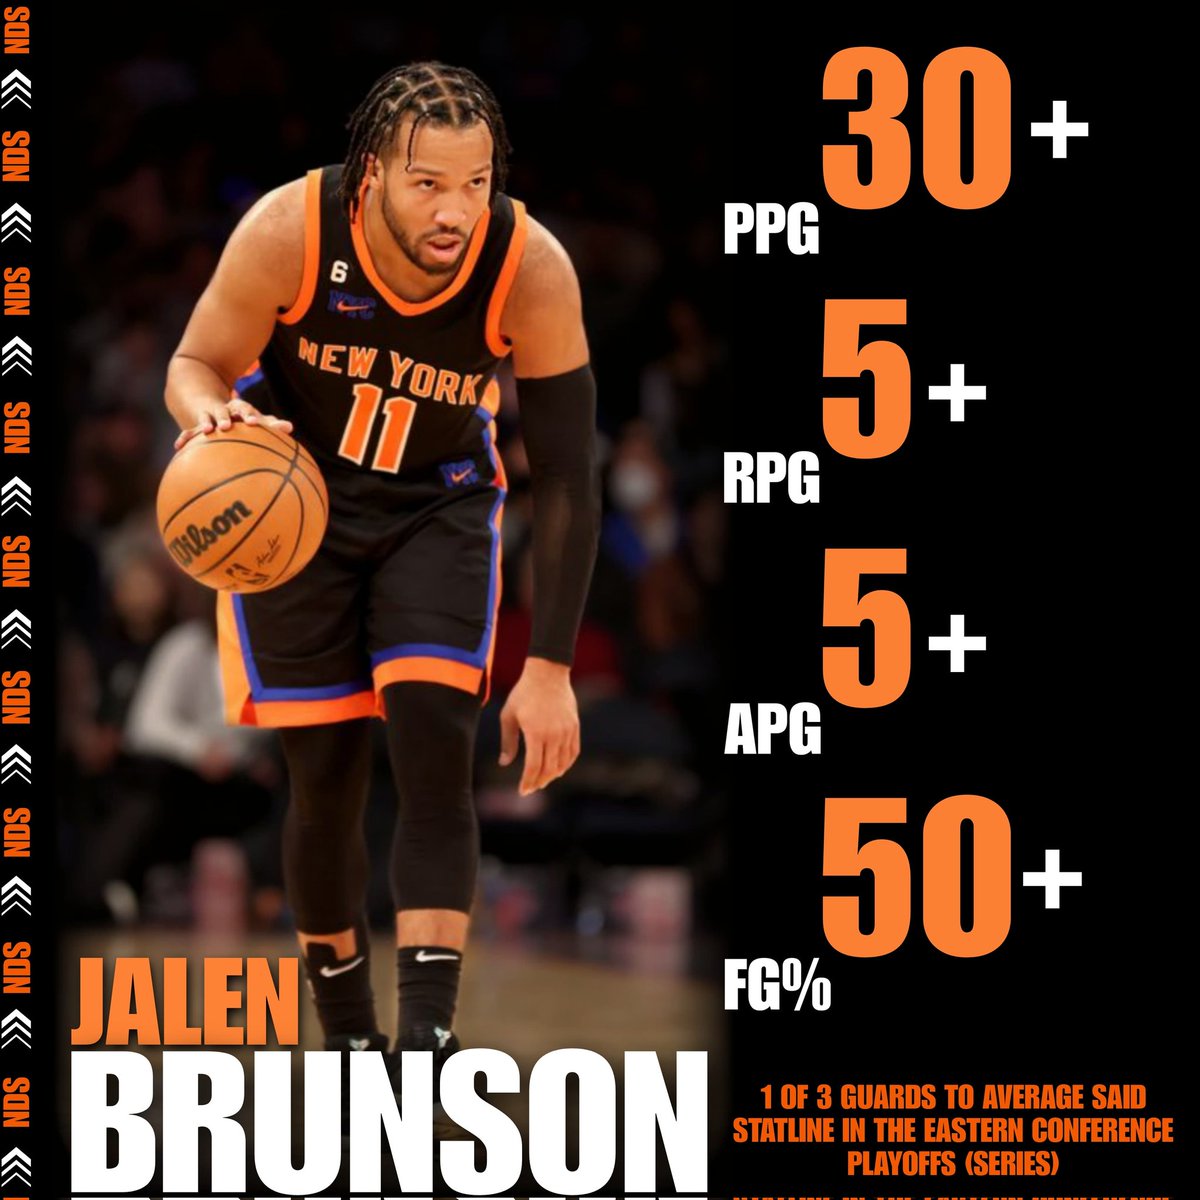 Jalen Brunson doesn't get enough attention for this past season (career year). He became the 3rd player in the Eastern Conference to average said Stats in a playoffs series. The other two... MJ and DWADE. 

#nba #newyork #knicks @jalenbrunson1 https://t.co/Q6TKbcDWiN